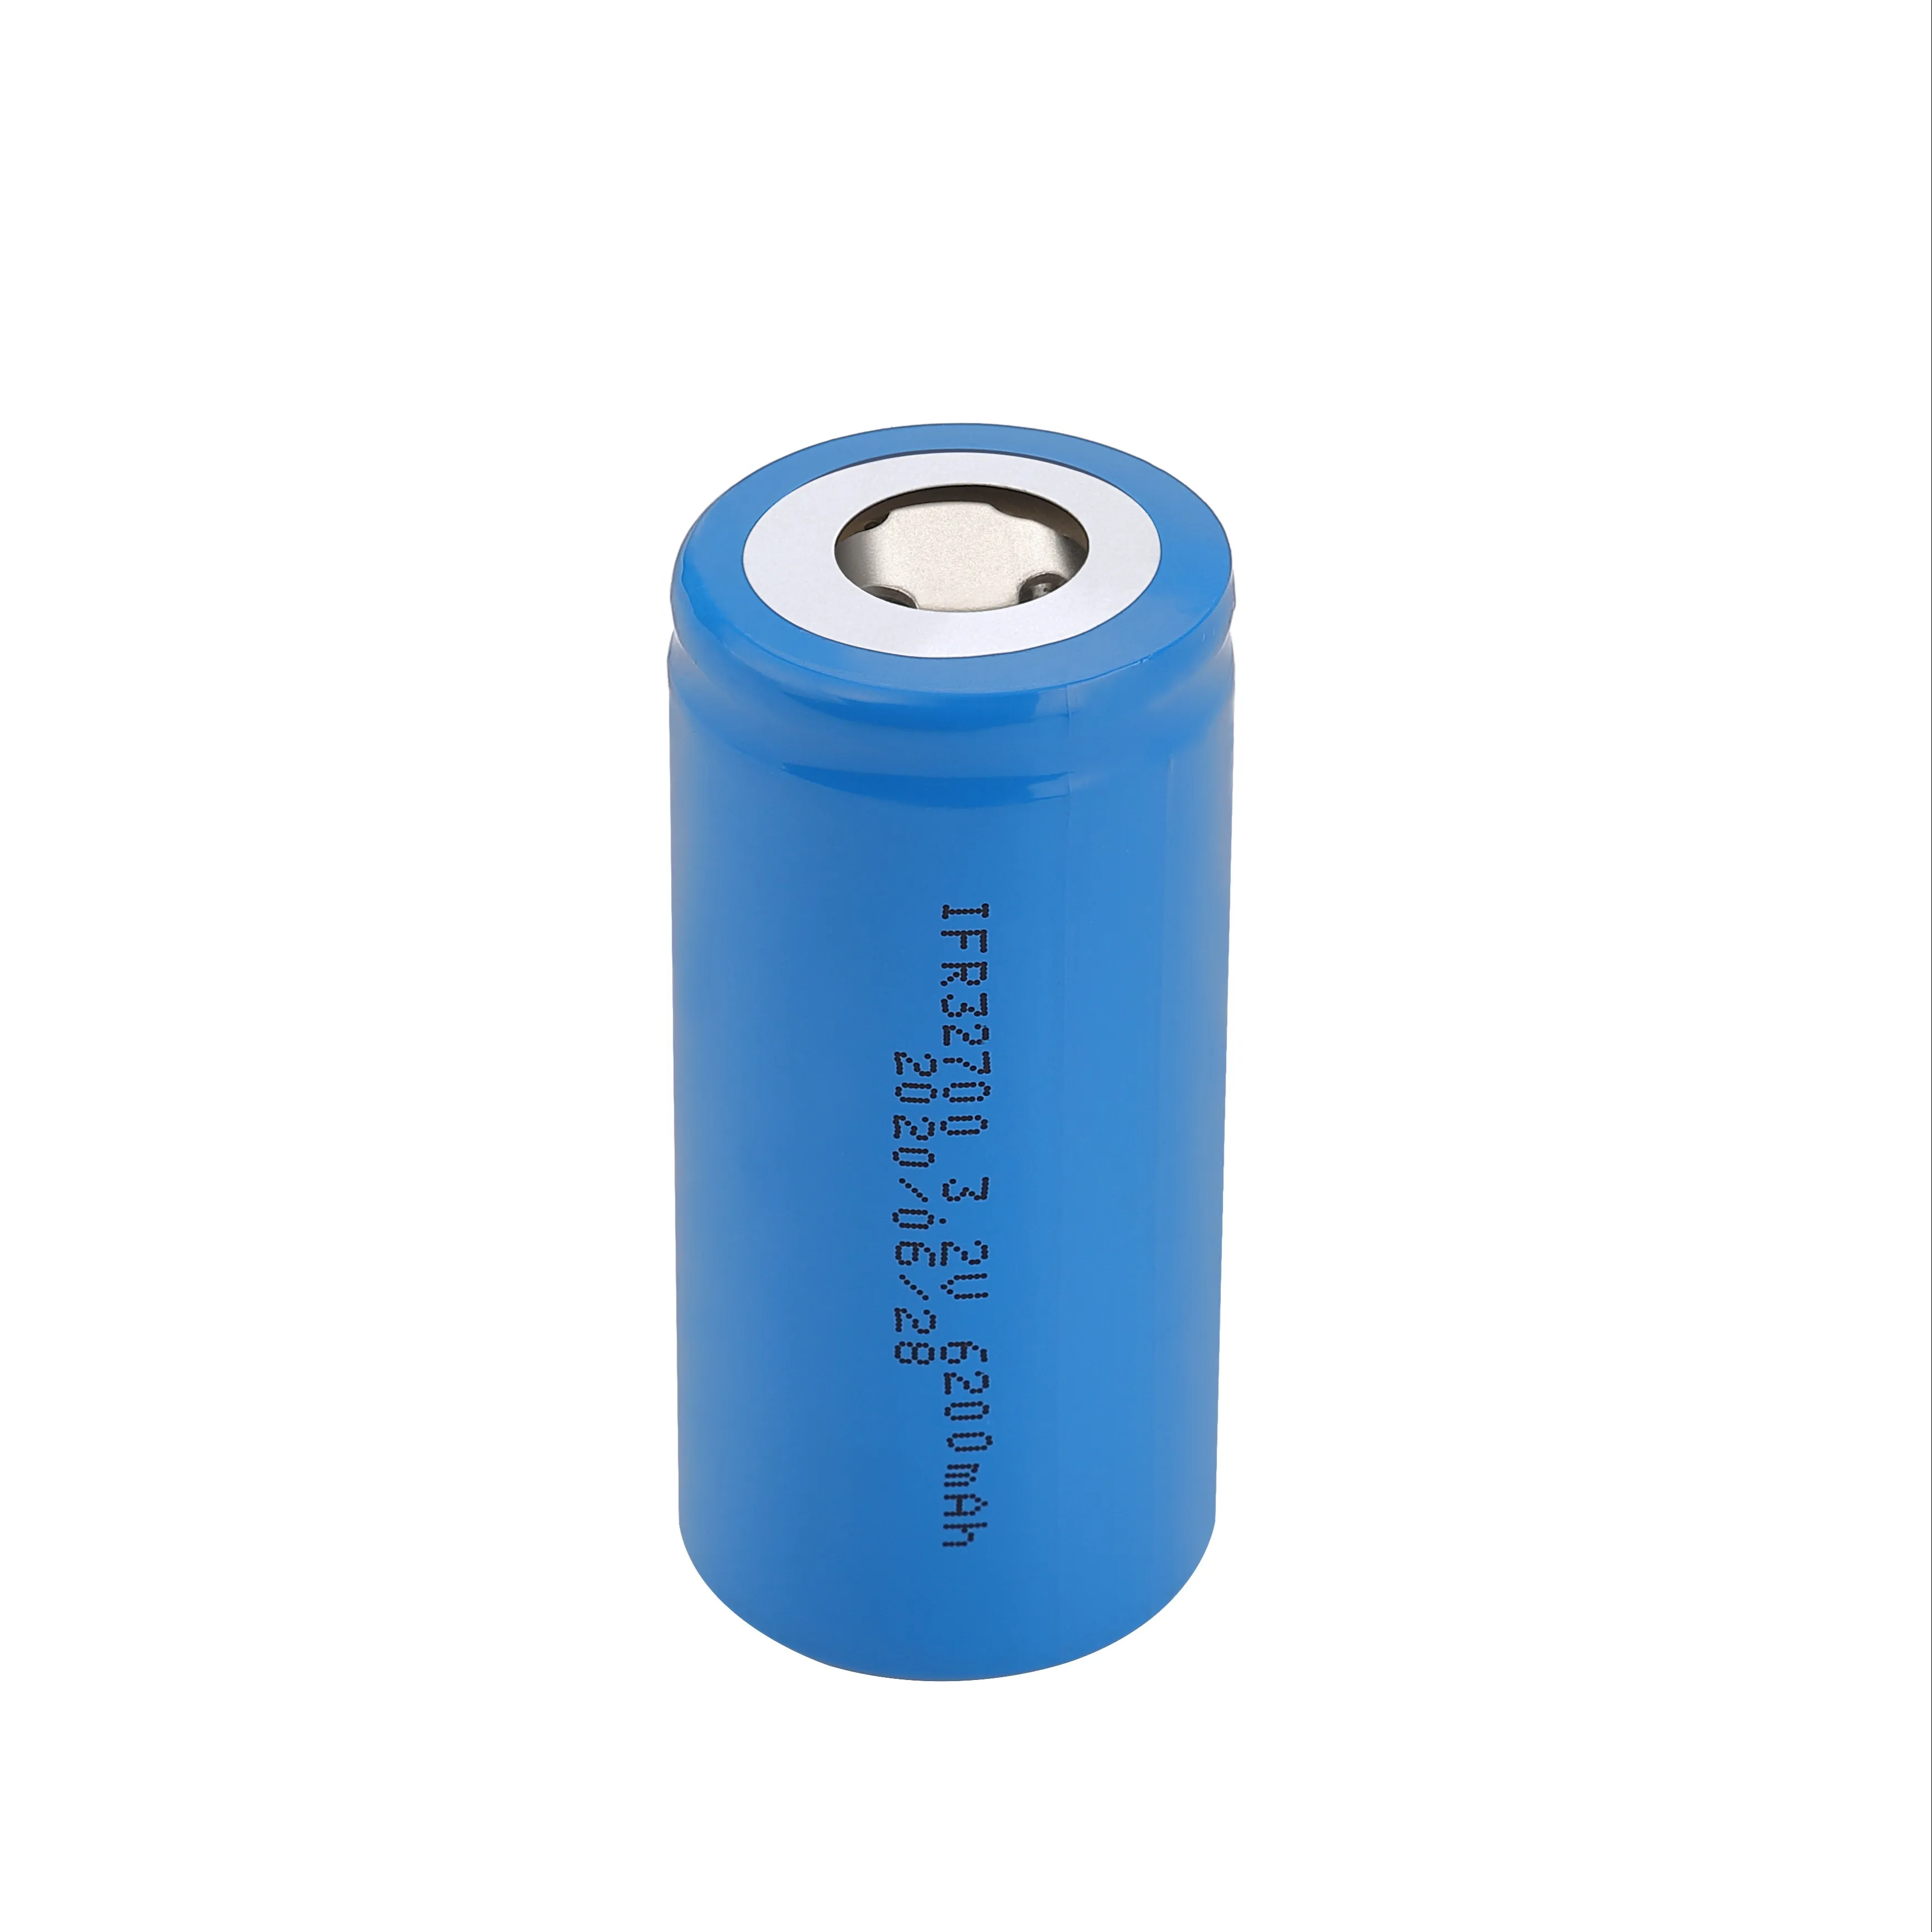 Li-ion Battery Rechargeable Long Cycle Life Ifr 32650 Battery Lifepo4 32650 3.2v 5ah Lithium Iron Phosphate Battery Cell Type